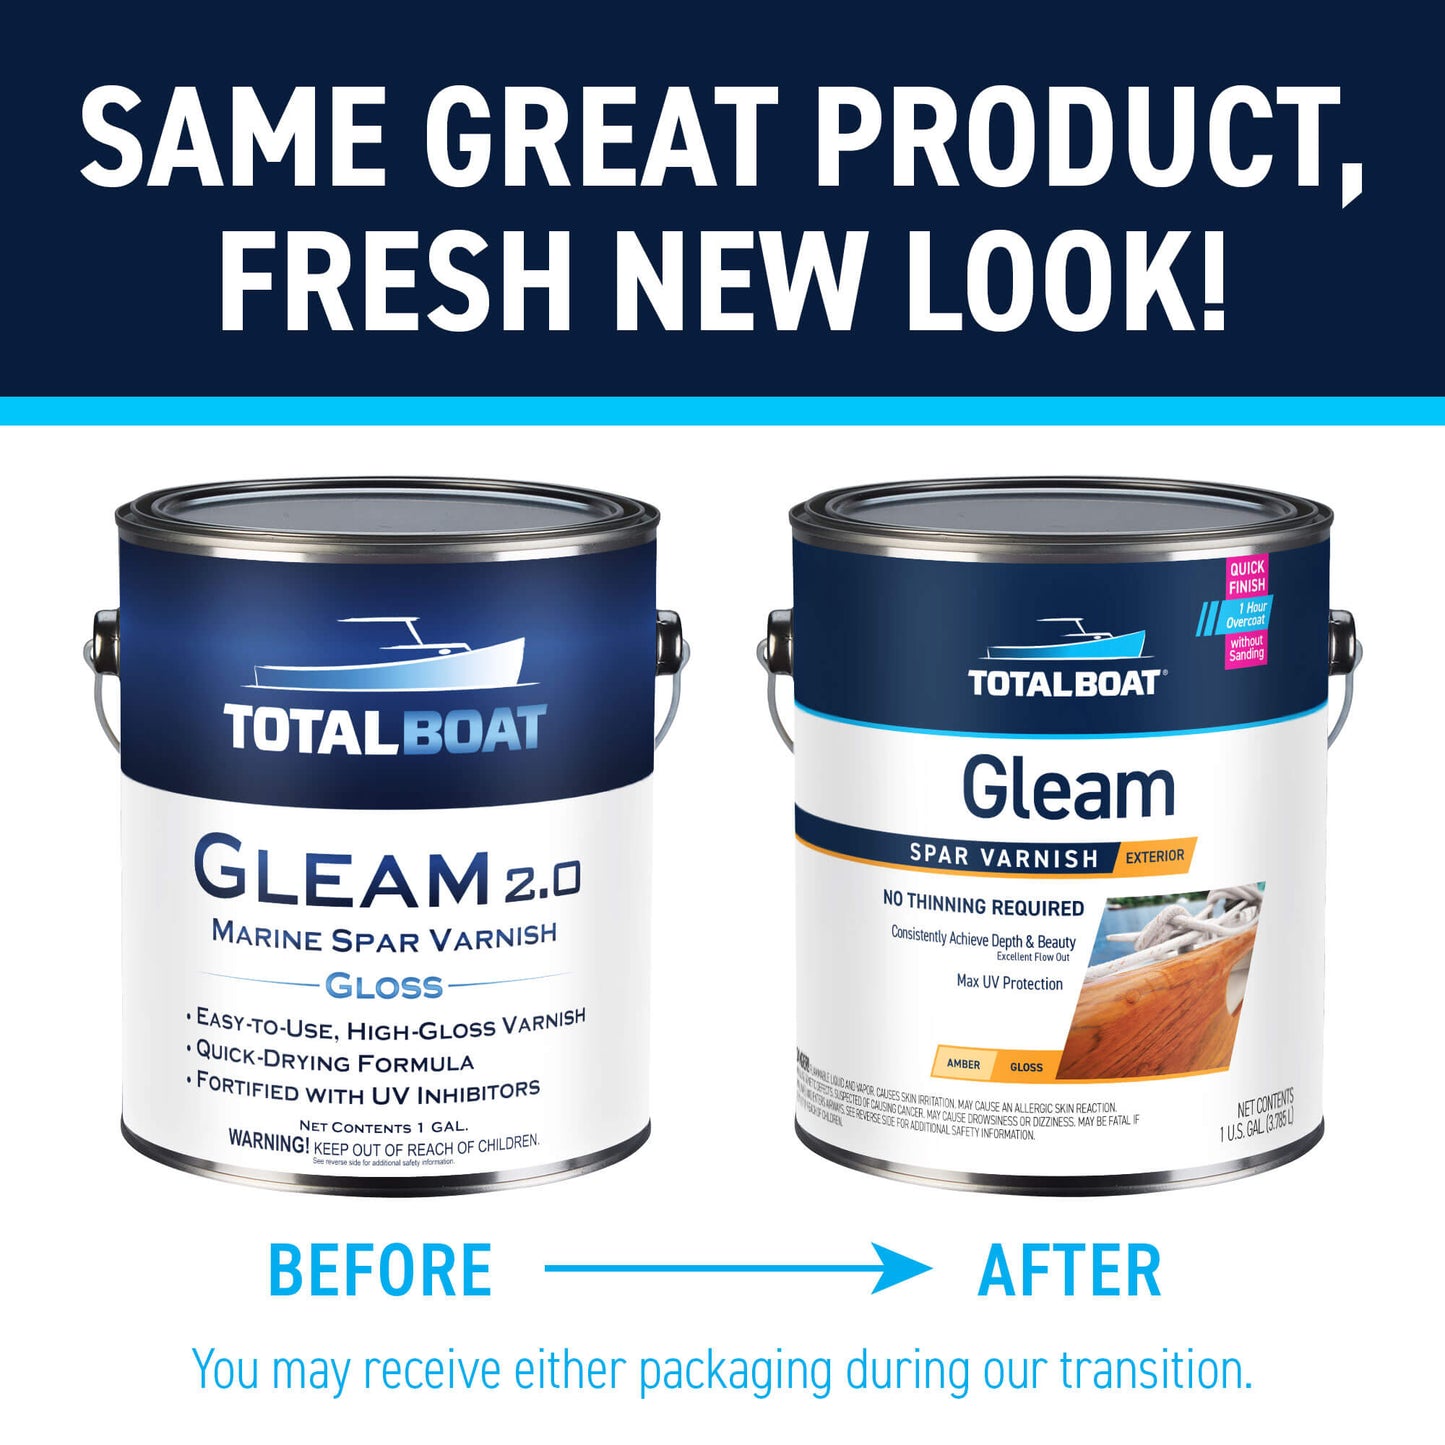 TotalBoat Gleam: Same Great Product, Fresh New Look!